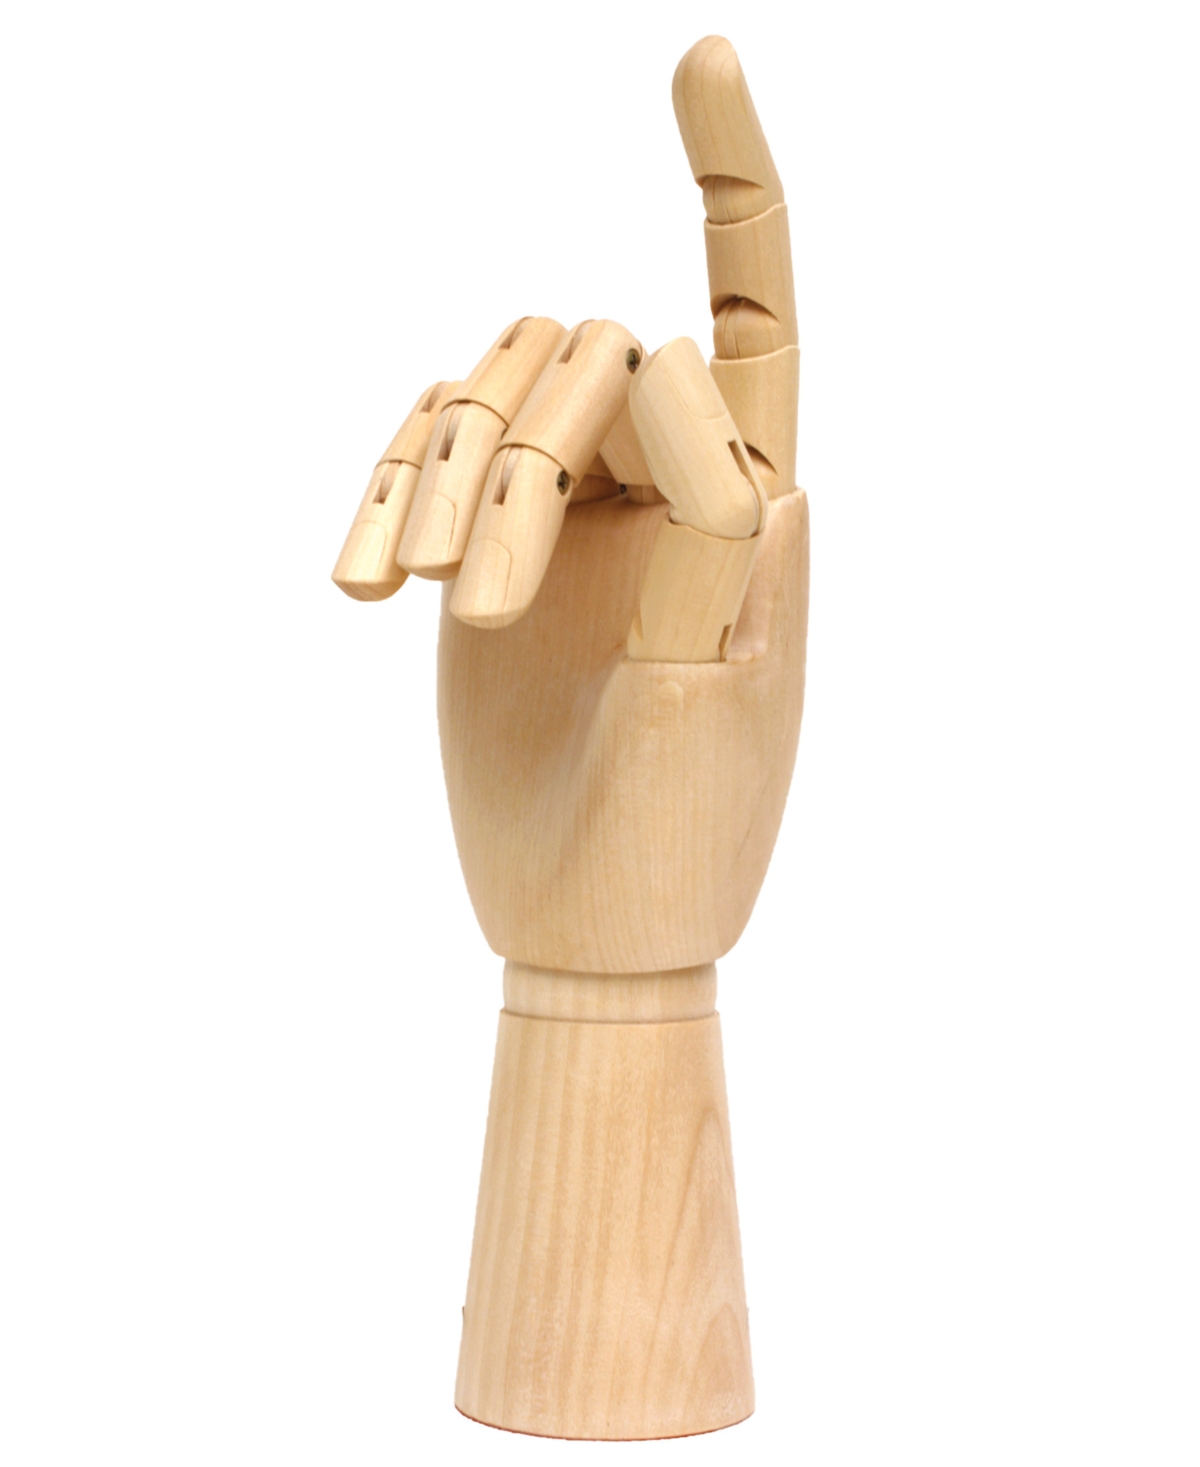 Articulated Wooden Right Hand - Natural